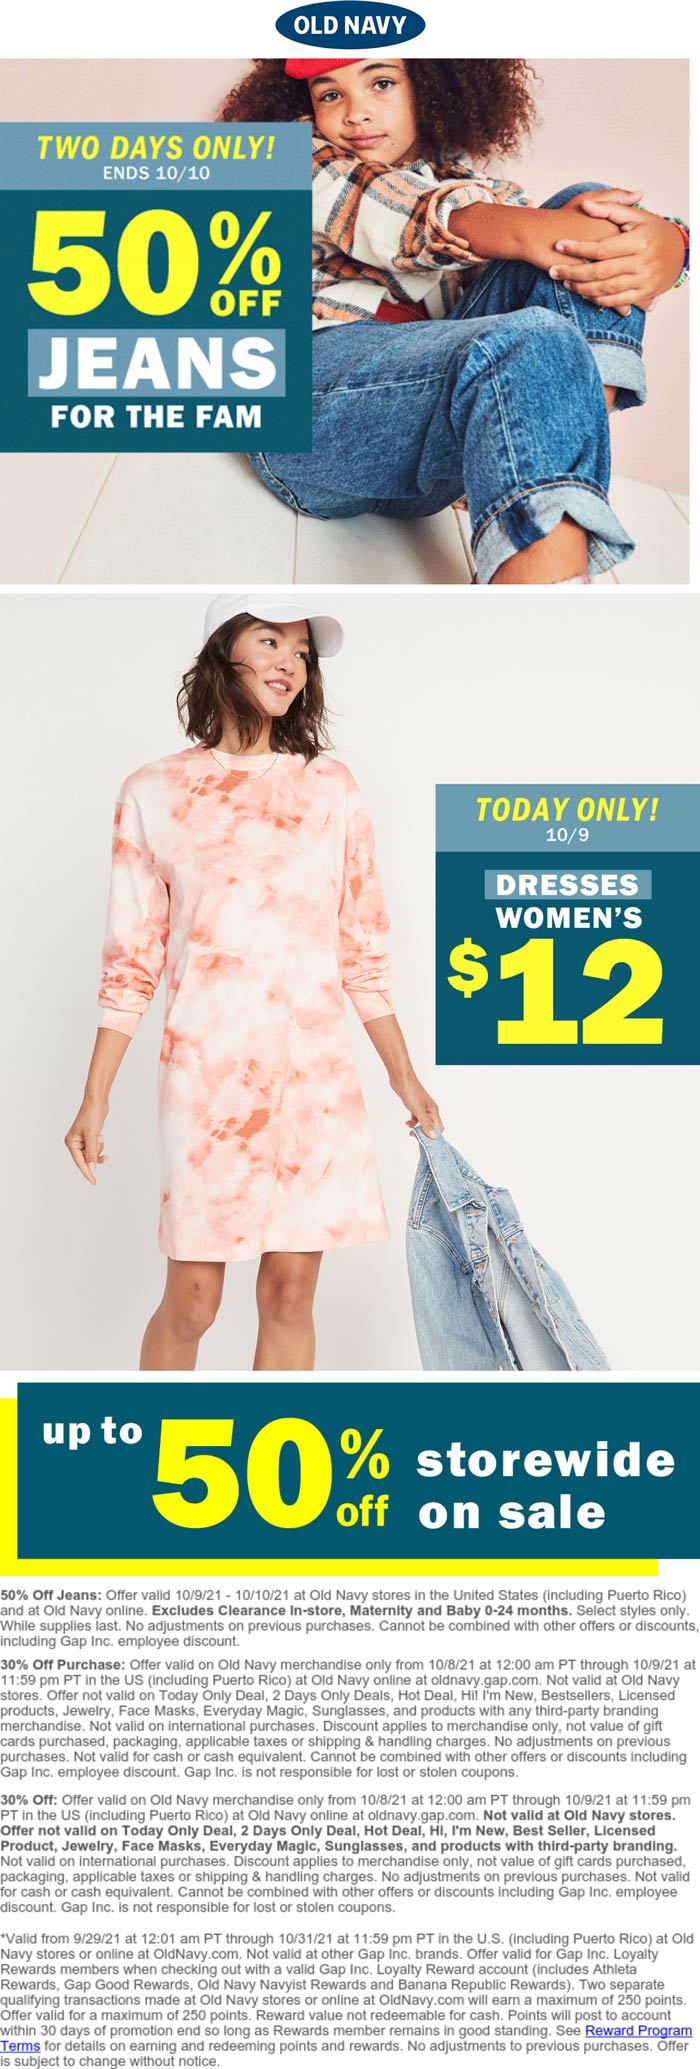 Old Navy stores Coupon  50% off jeans & more at Old Navy, ditto online #oldnavy 